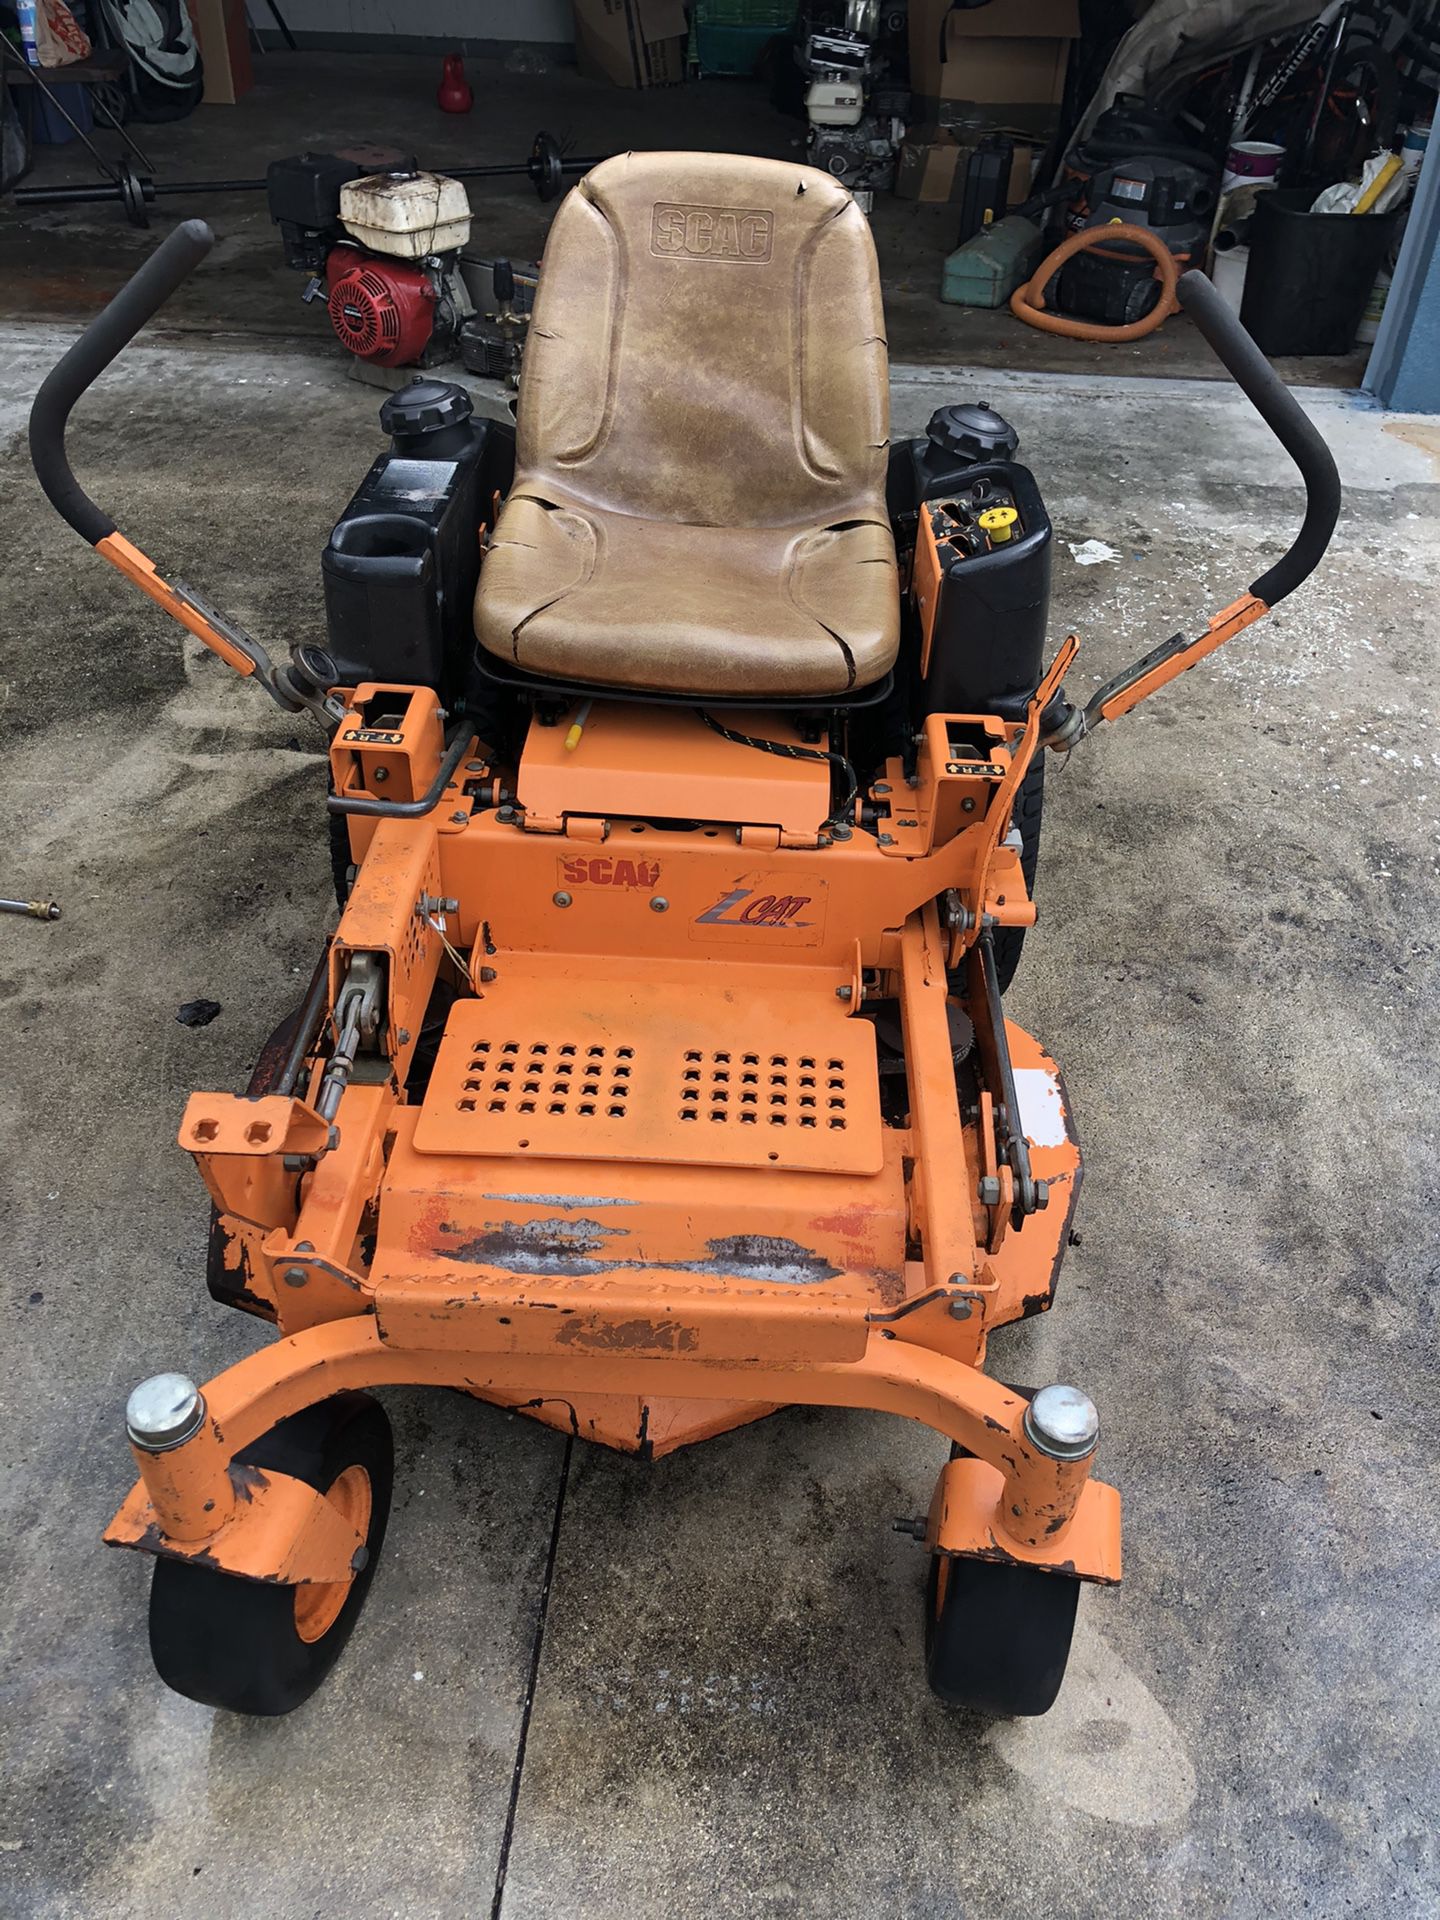 Scag commercial 36 inch lawn mower